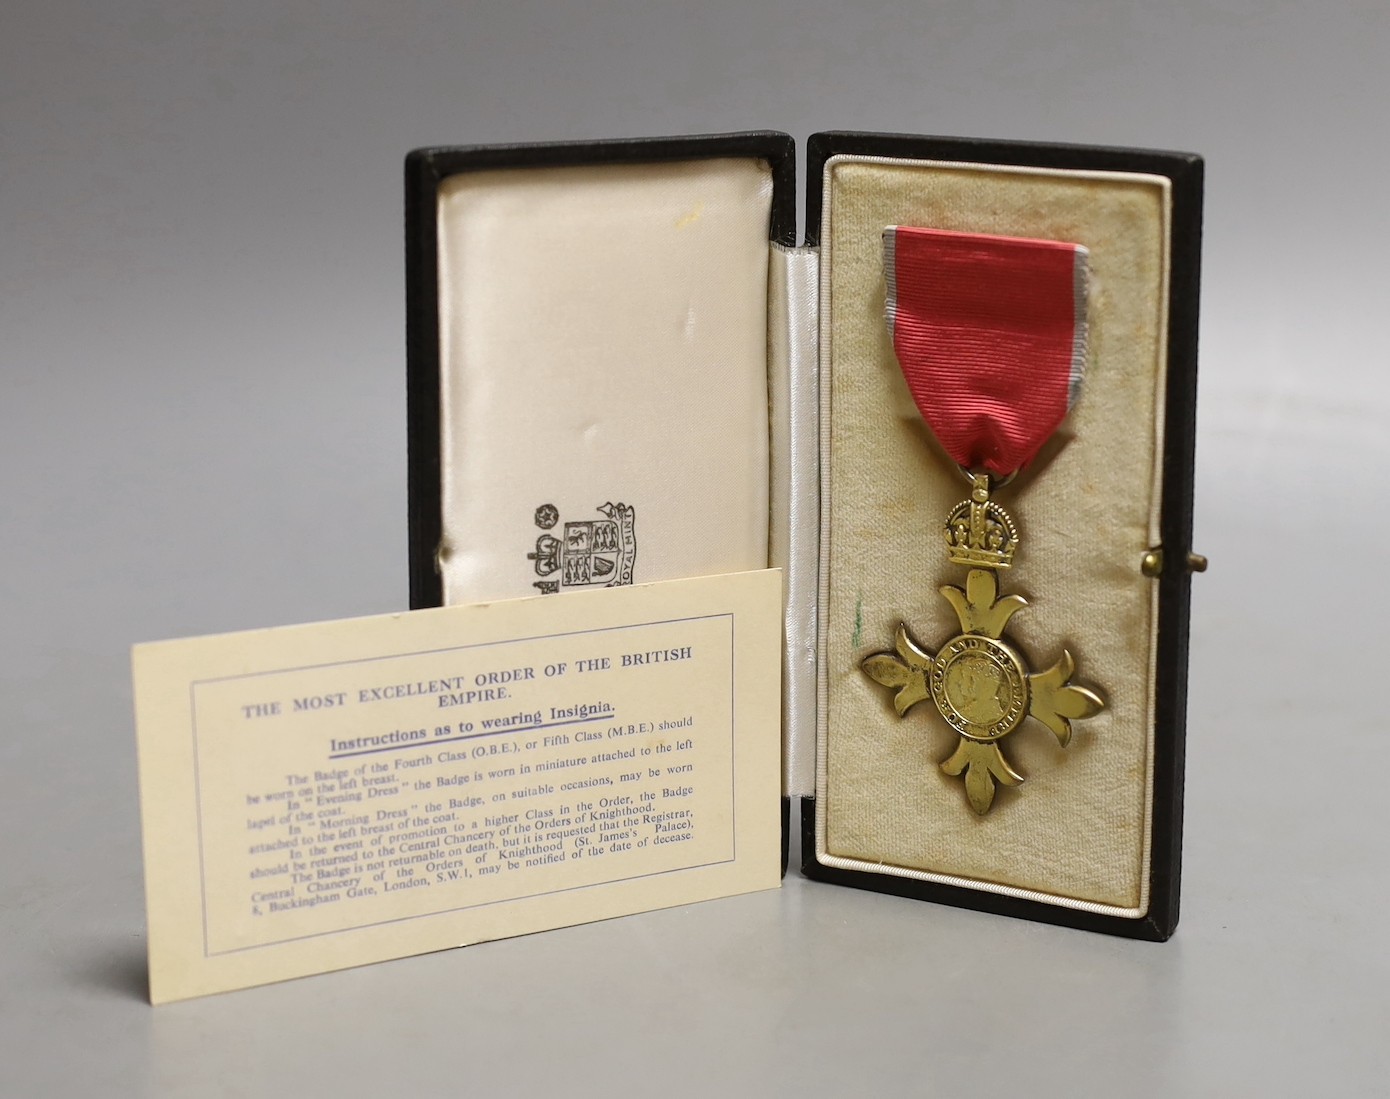 An OBE given to Edward Wilmot Morgan for his services in Hong Kong supplying mains water from Red China to Hong Kong.